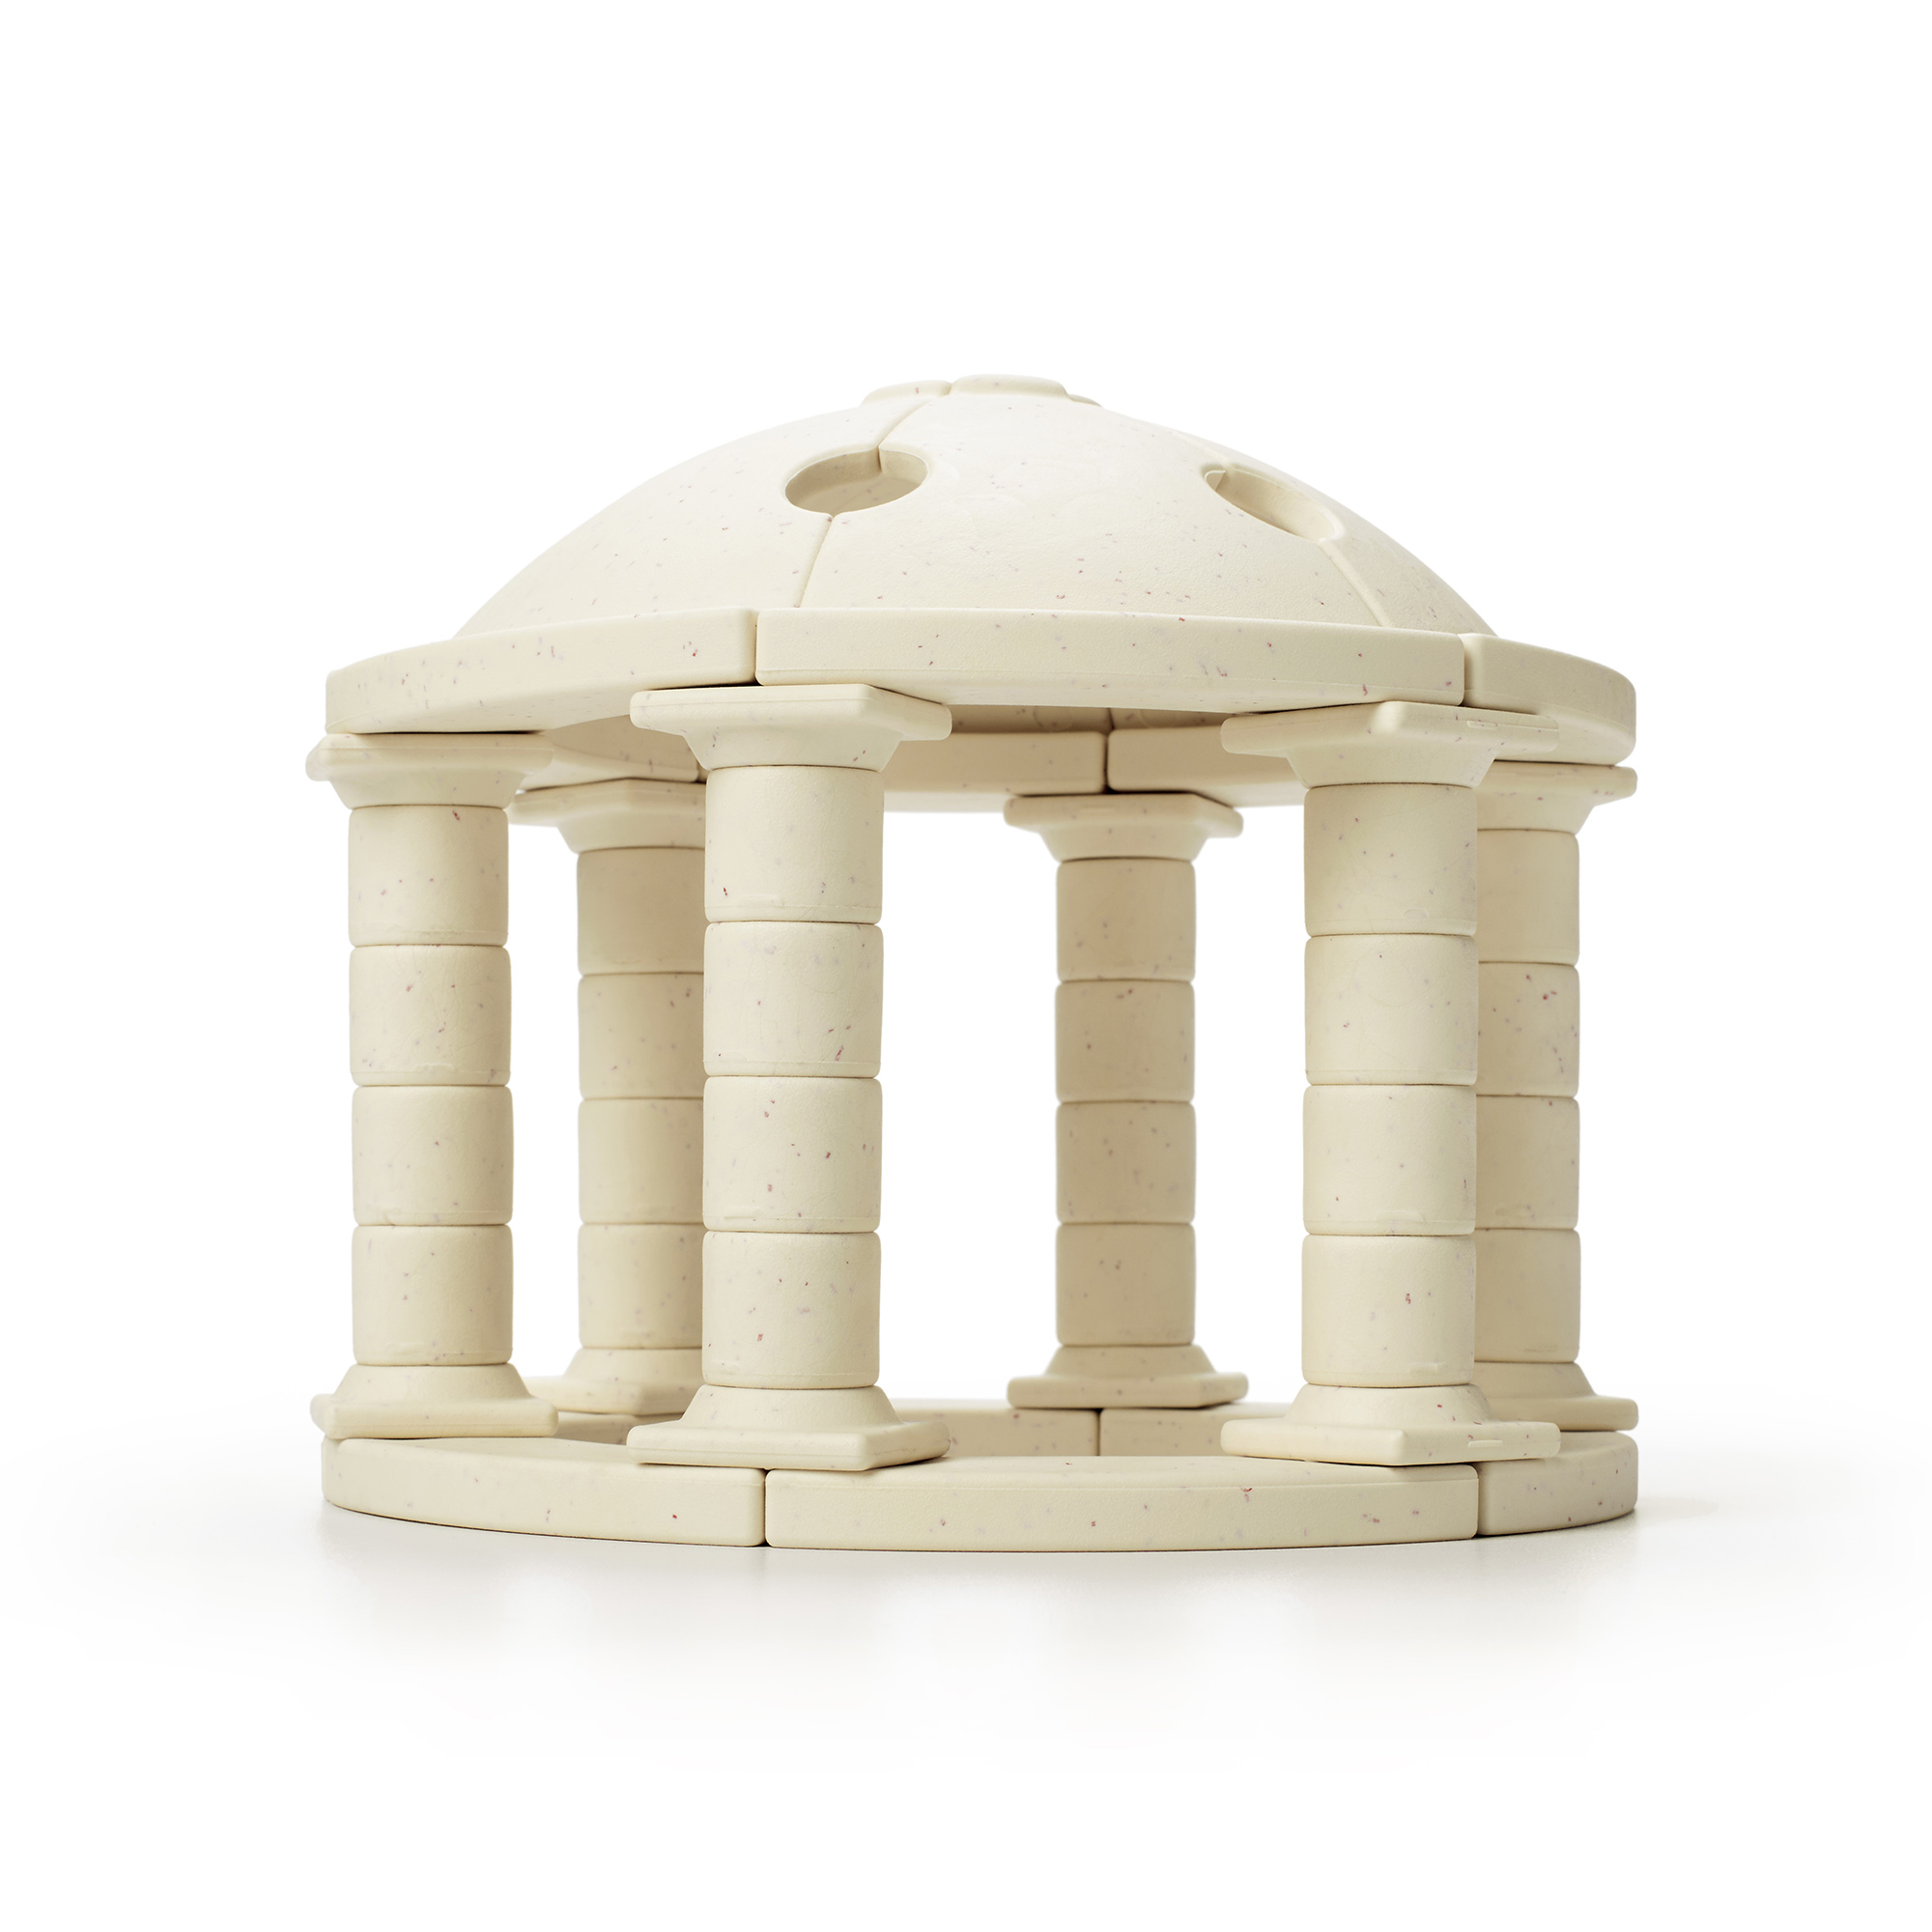 Taksa Toys Ancient Greek Dome Stem Toys Educational Stackable Building  Blocks, for Kids Ages 7 8 9 10+ Years Old, Indoor Premium Architectural Kit